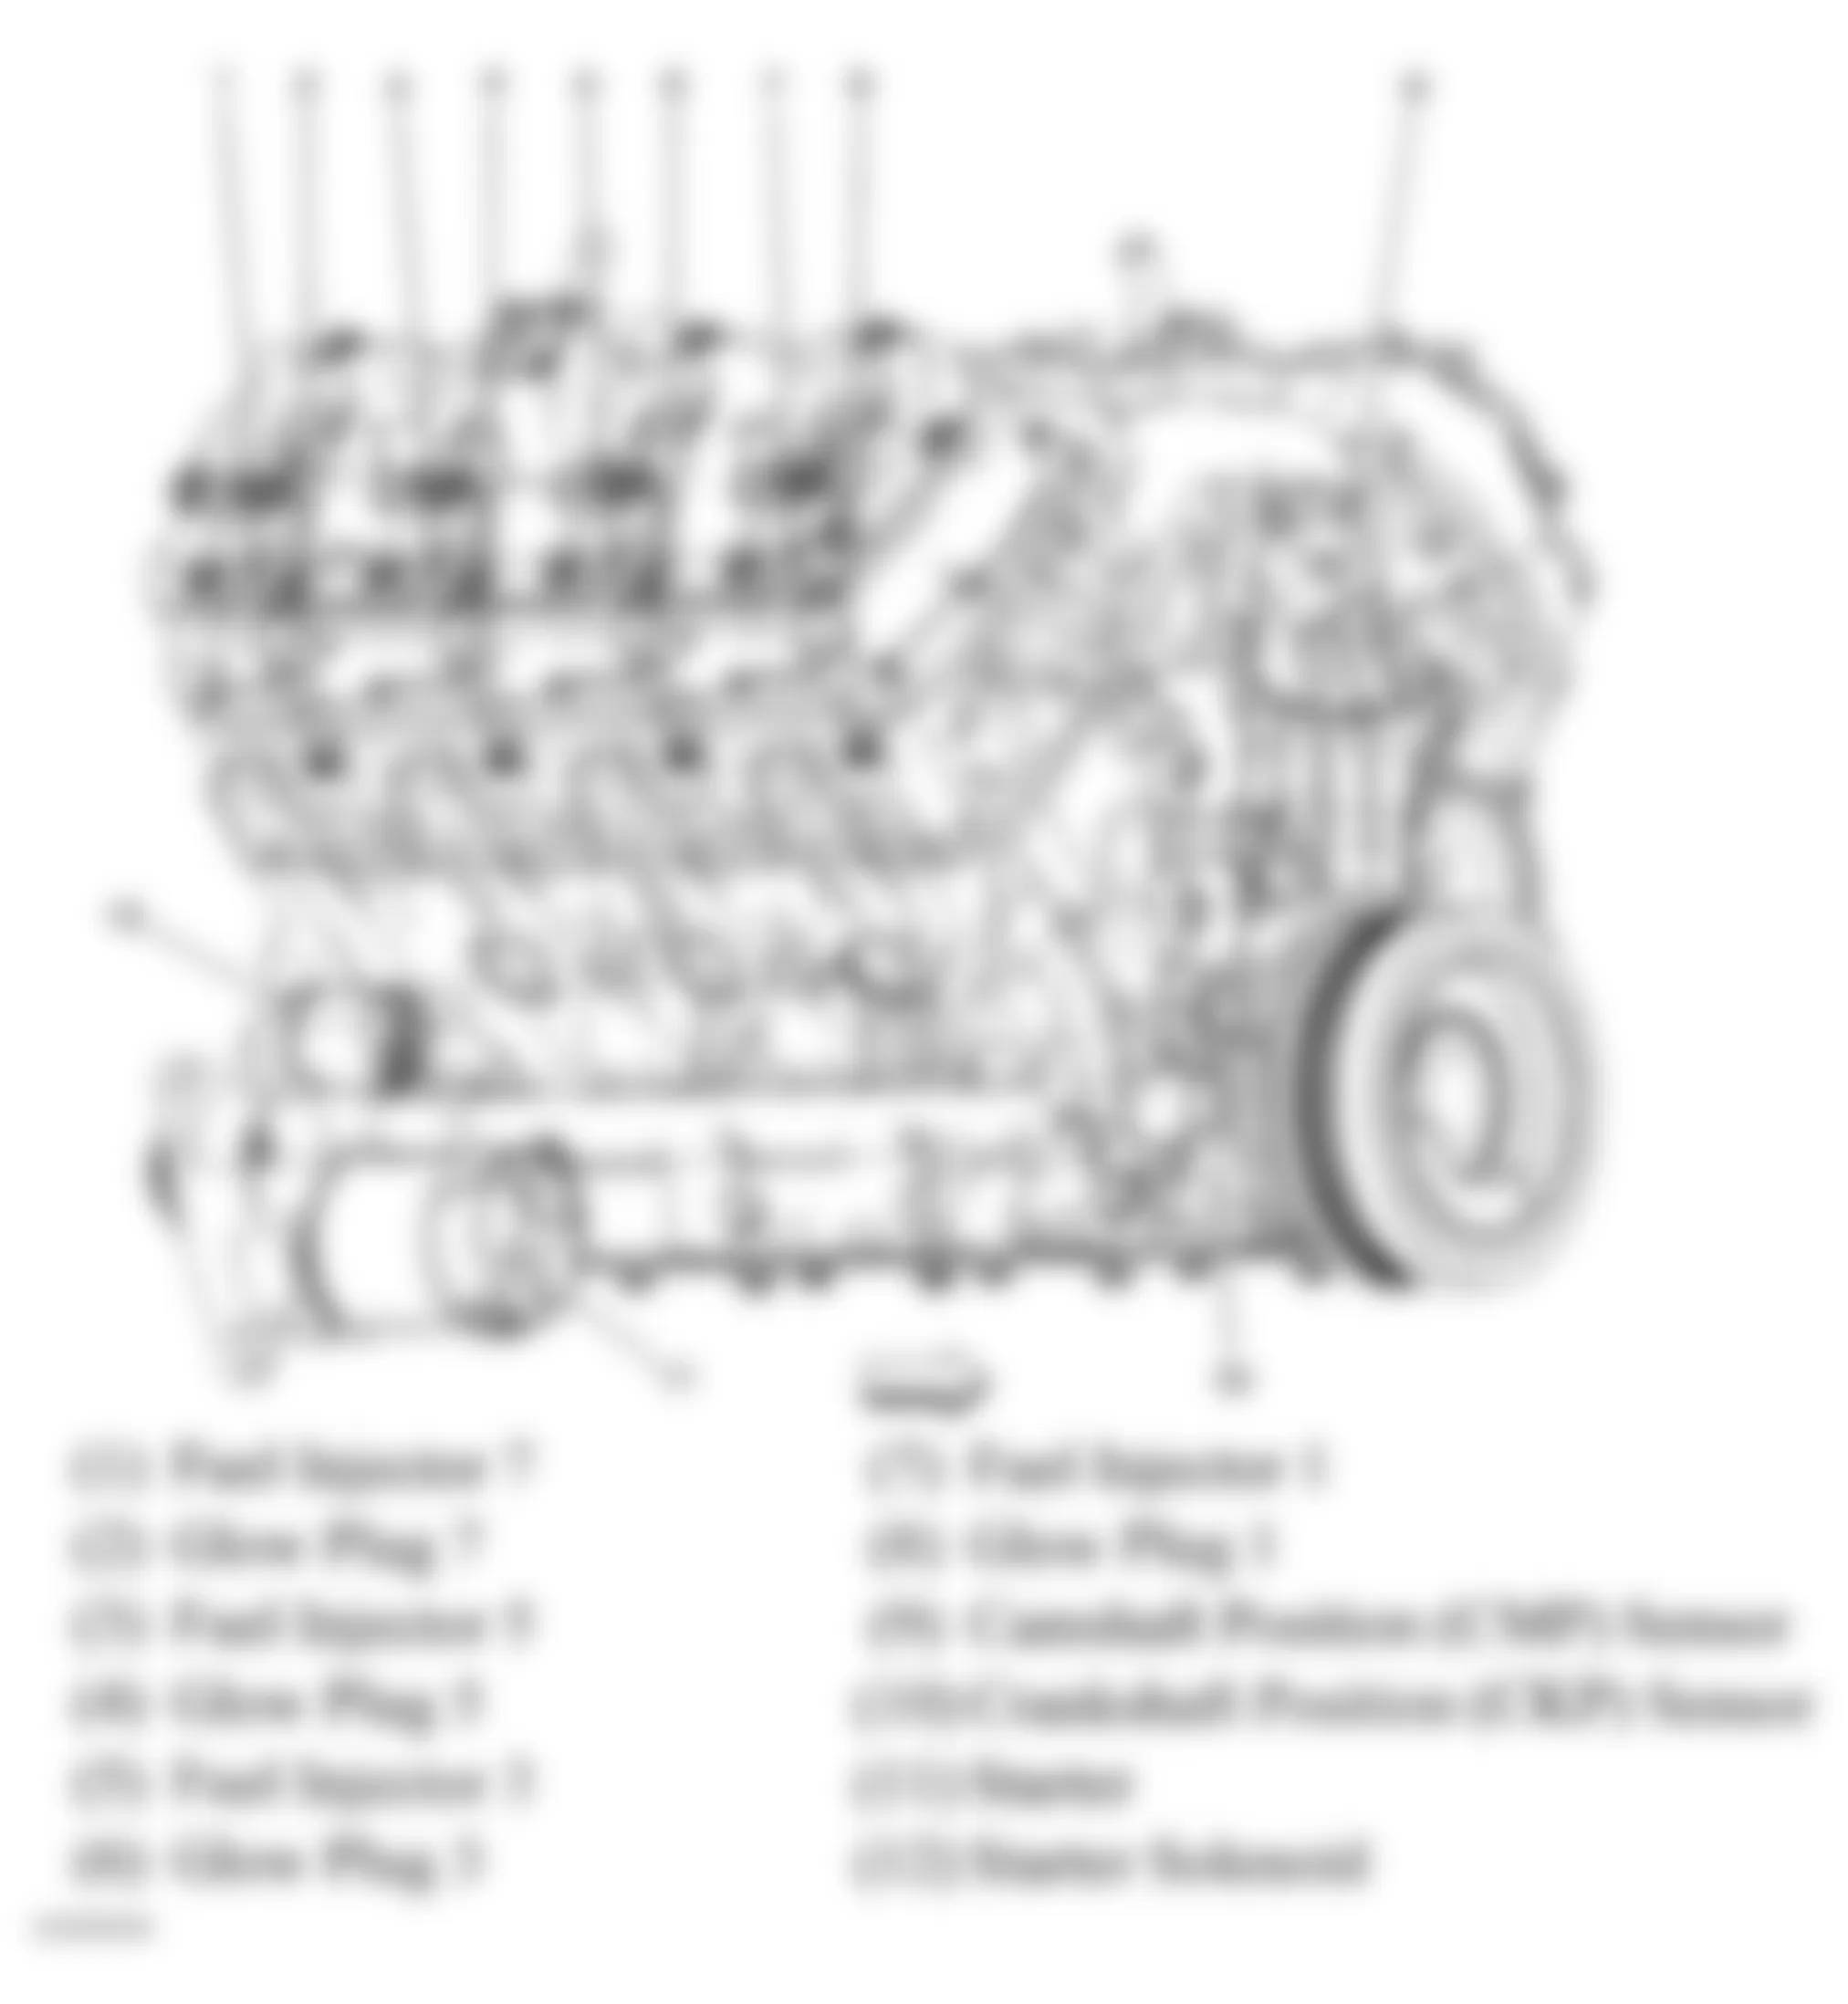 GMC Savana G1500 2006 - Component Locations -  Right Side Of Engine (6.6L VIN W)